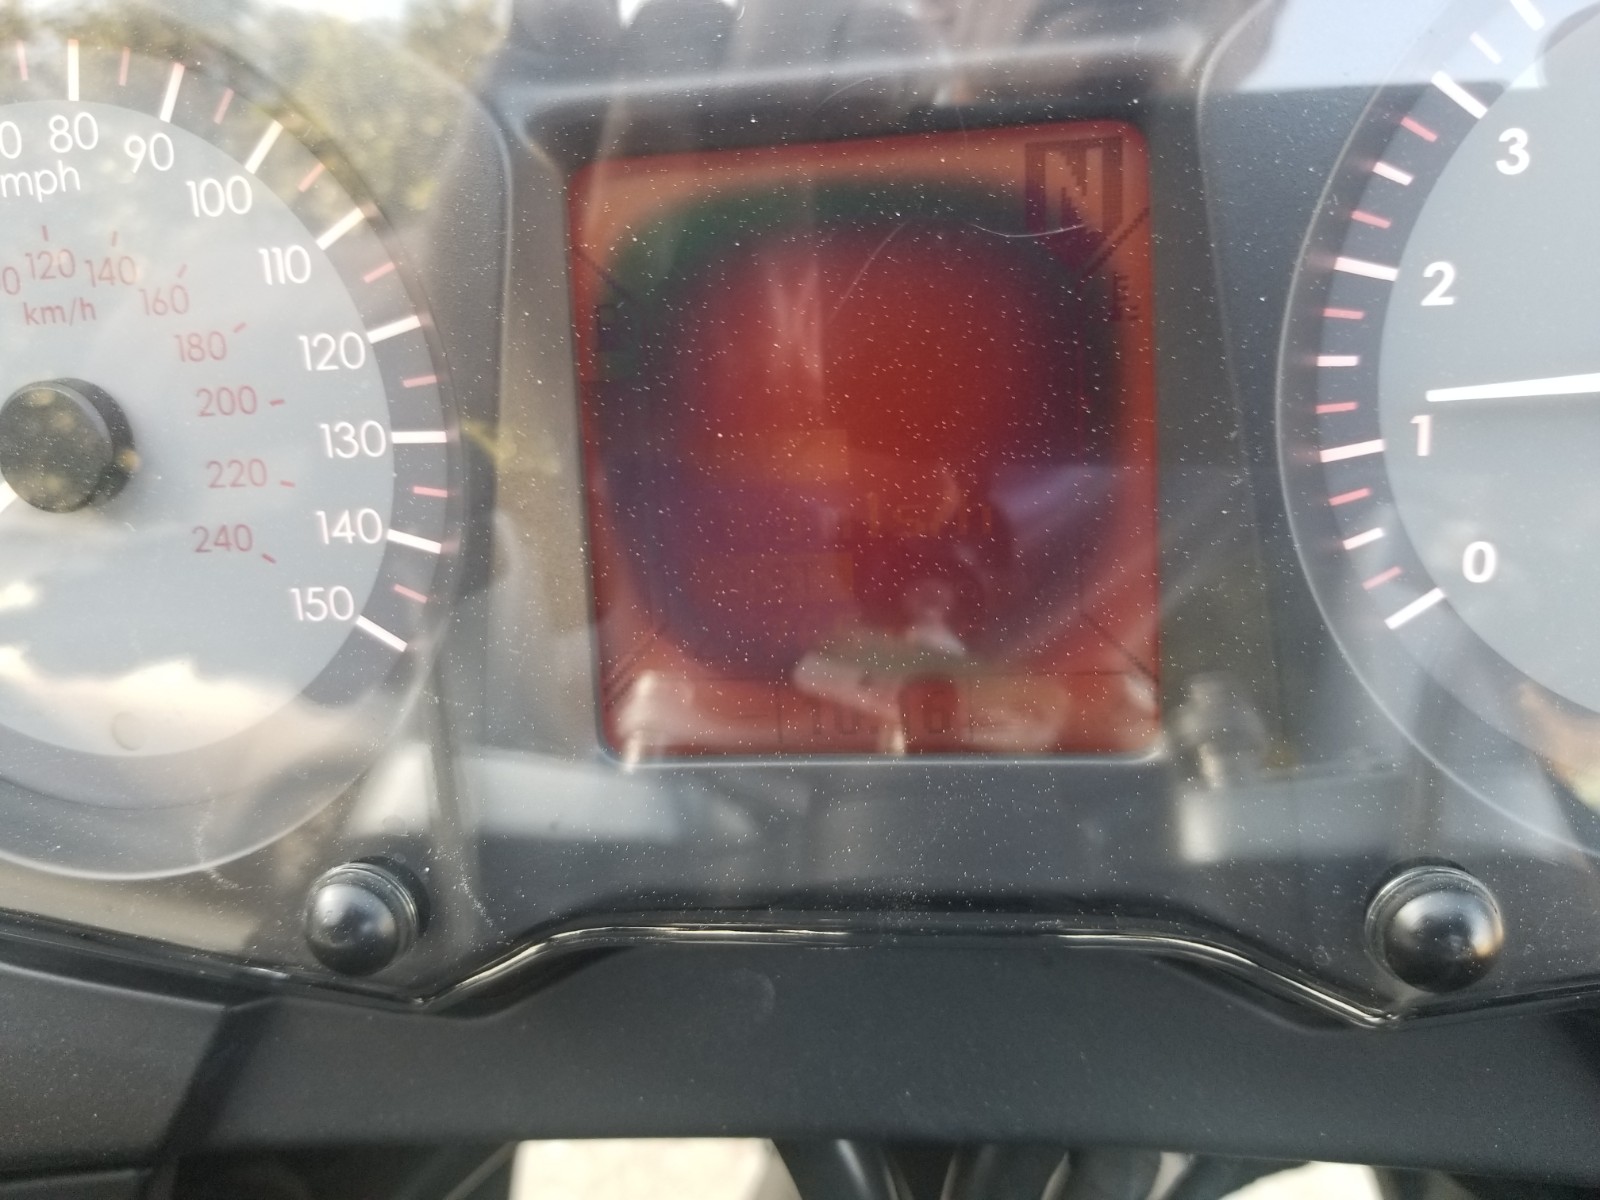 r1200rt instrument cluster issue pic 1.jpg